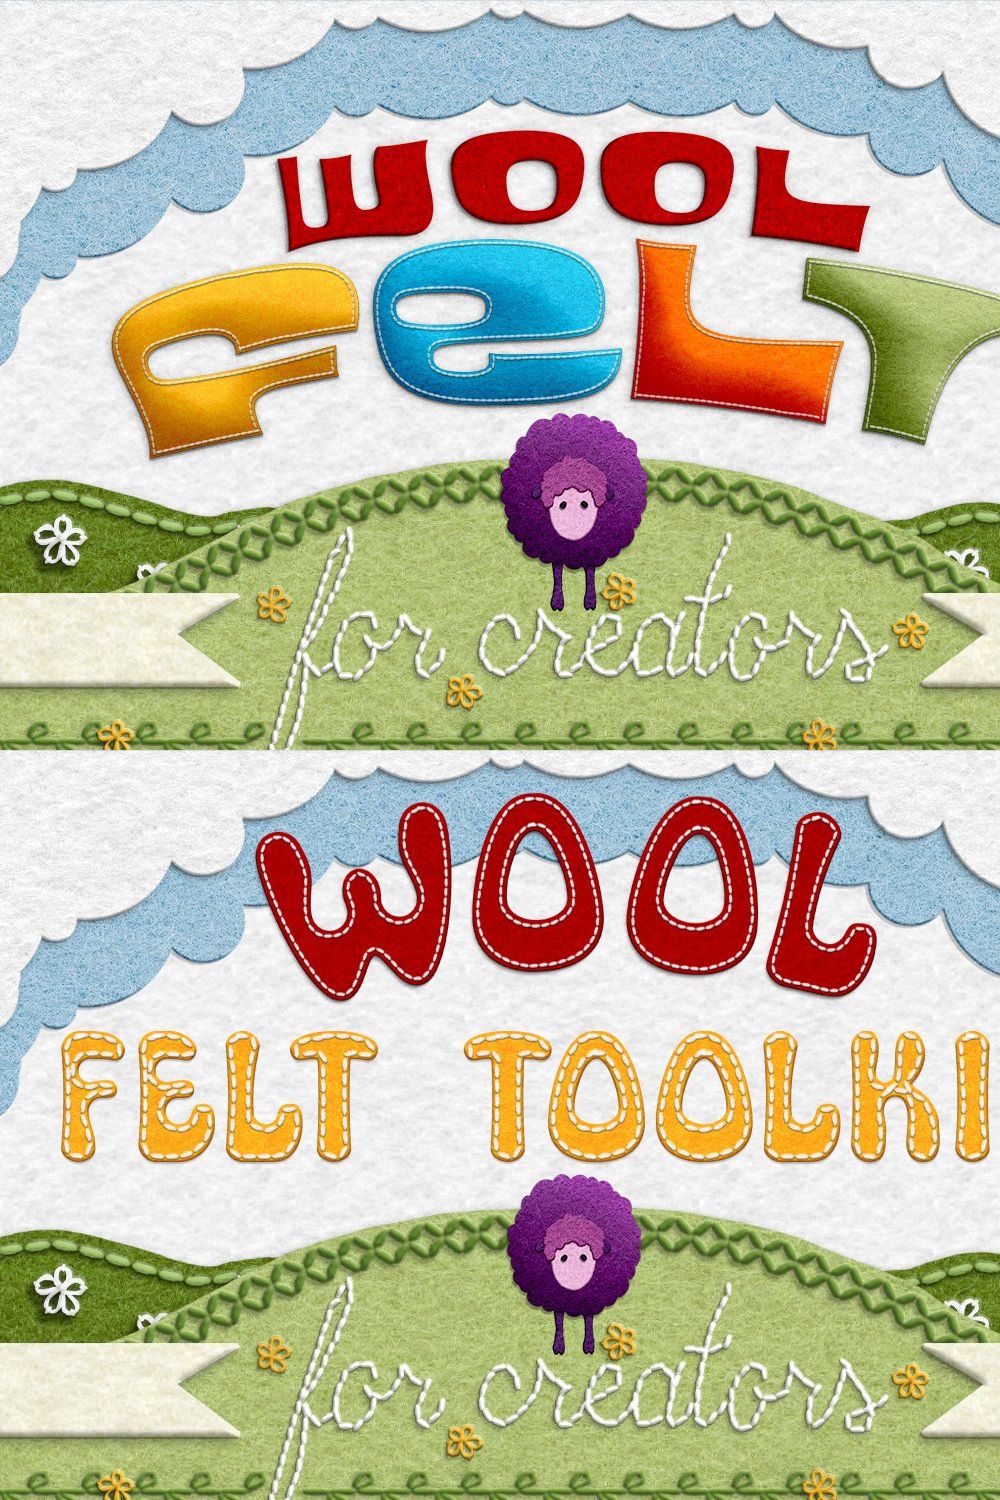 Wool Felt Tool Kit for Photoshop pinterest preview image.